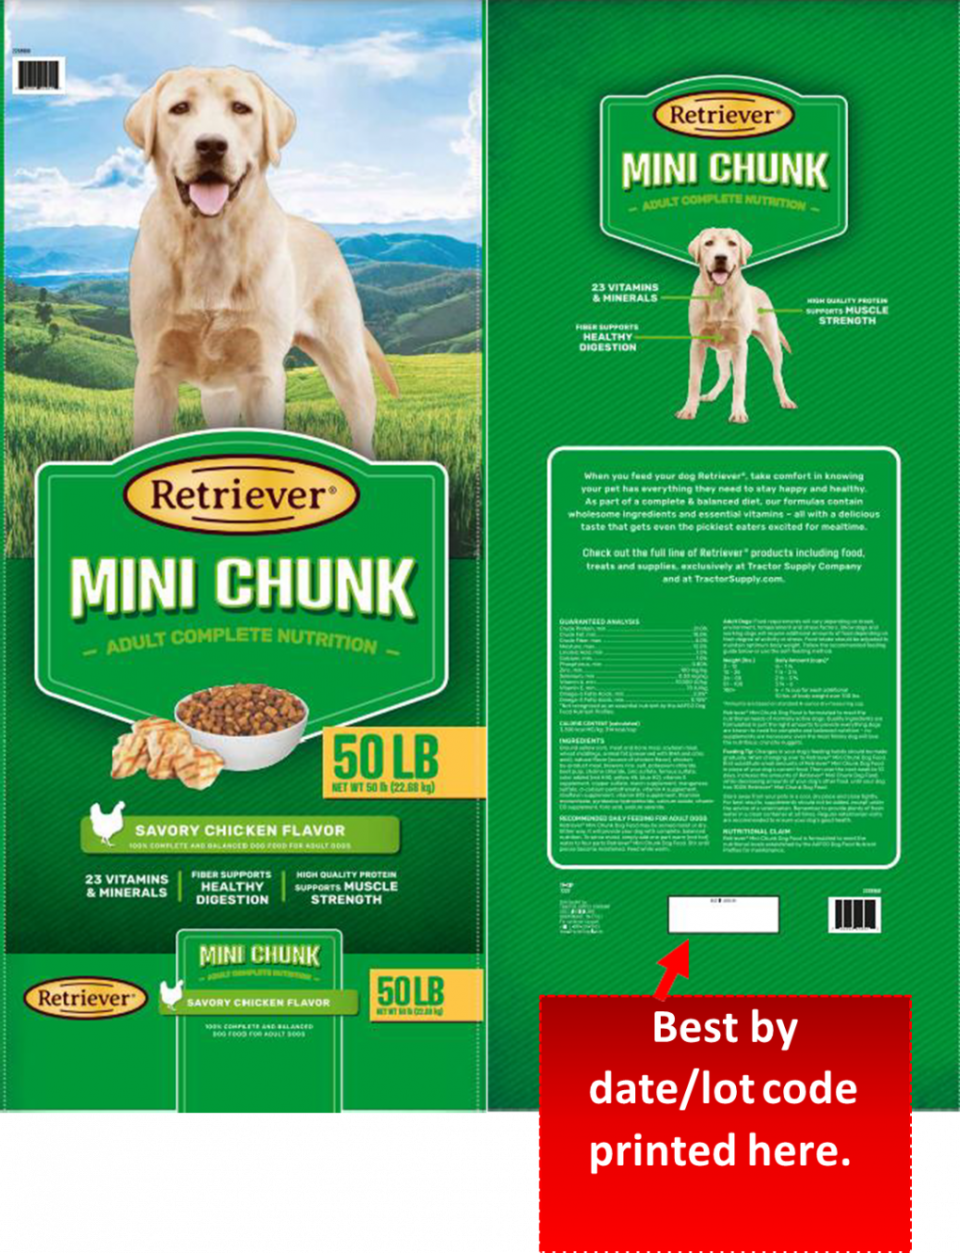 Multiple brands of dog food recalled as FDA warns of salmonella risks